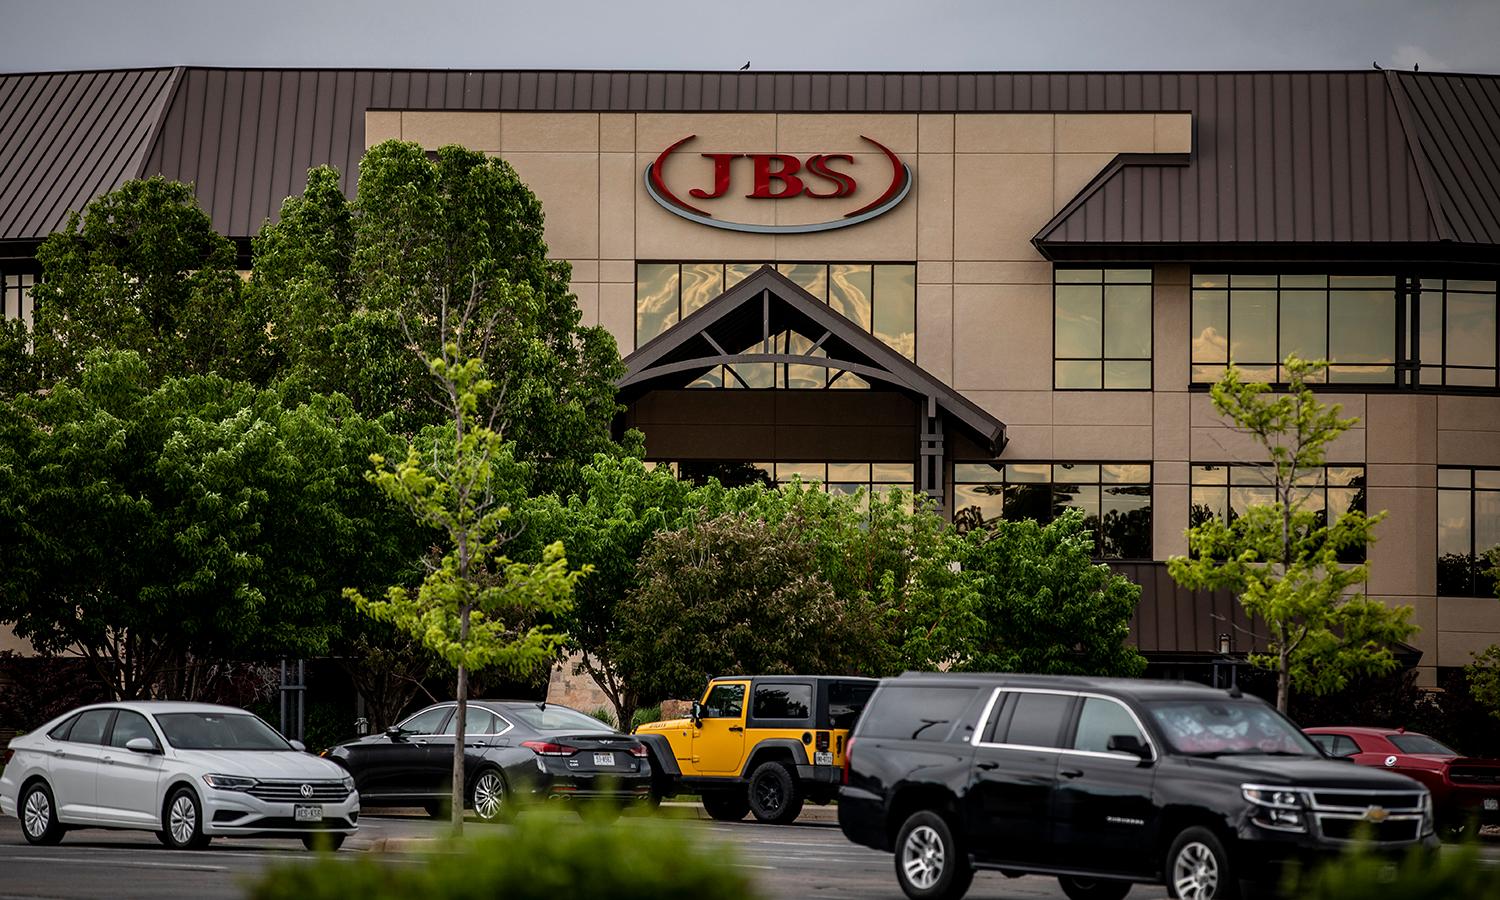 The JBS sign is seen at its headquarters.